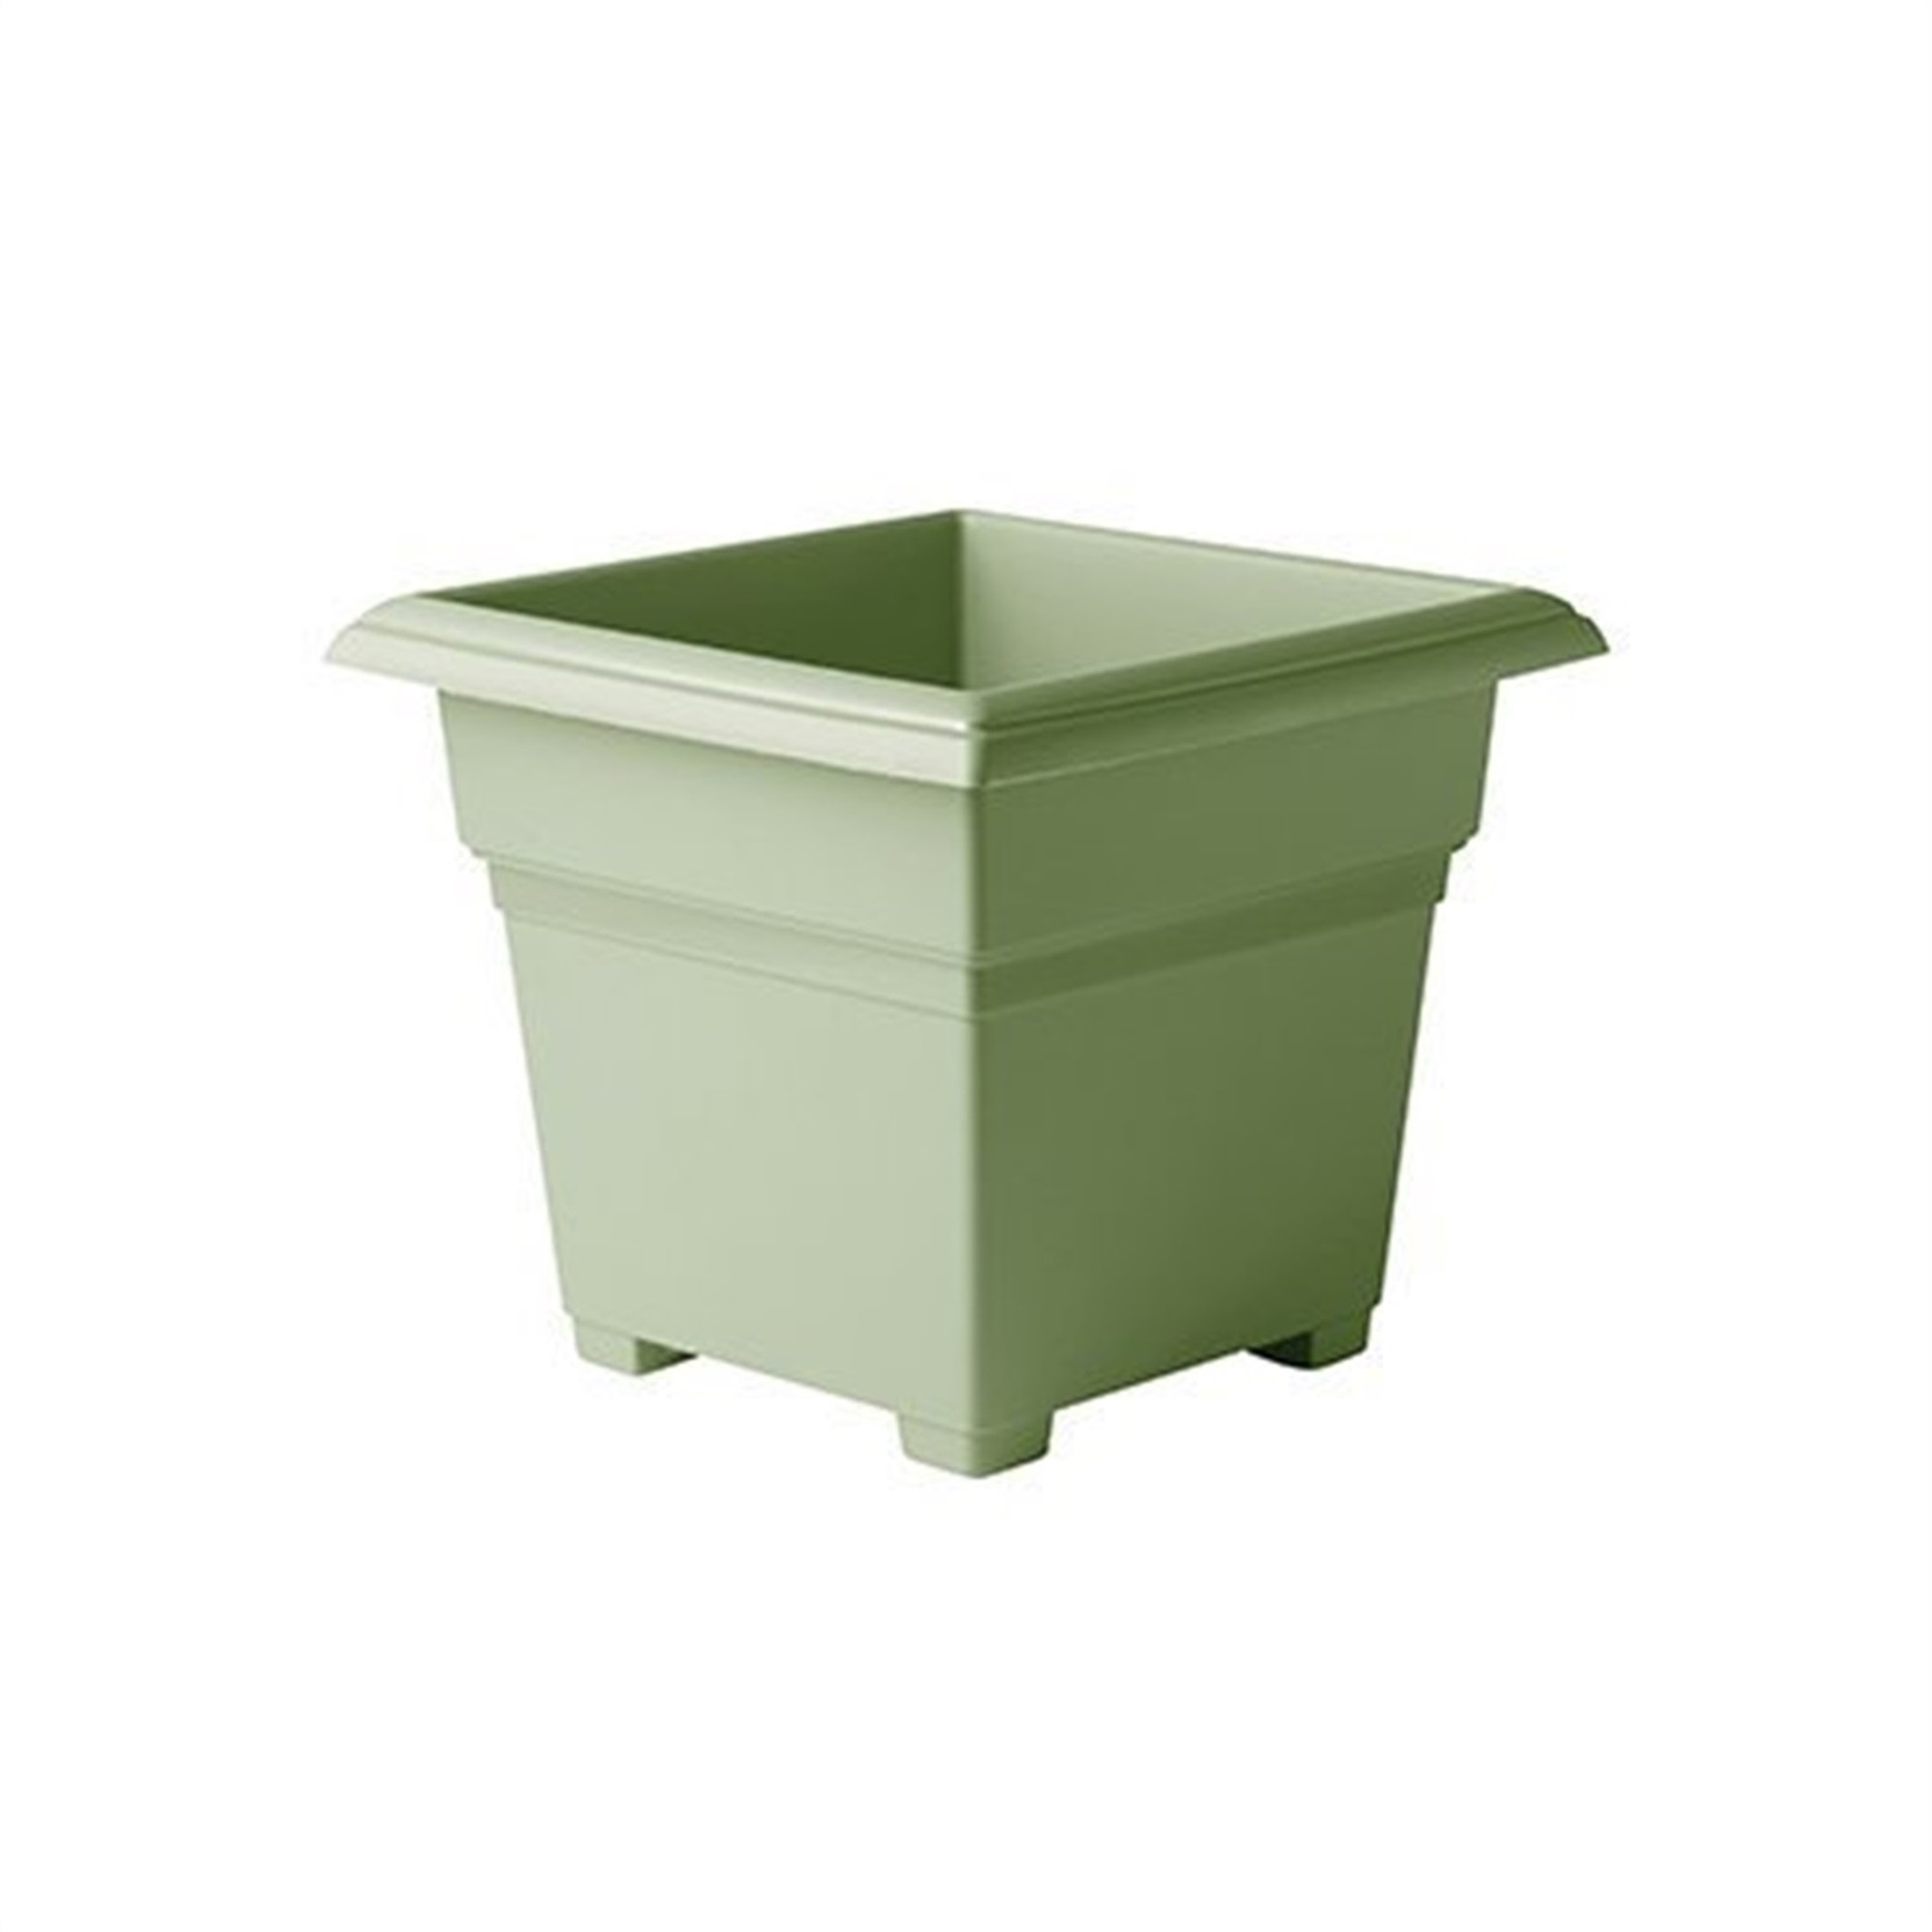 Novelty Countryside Square Tub Planter, Sage 14"